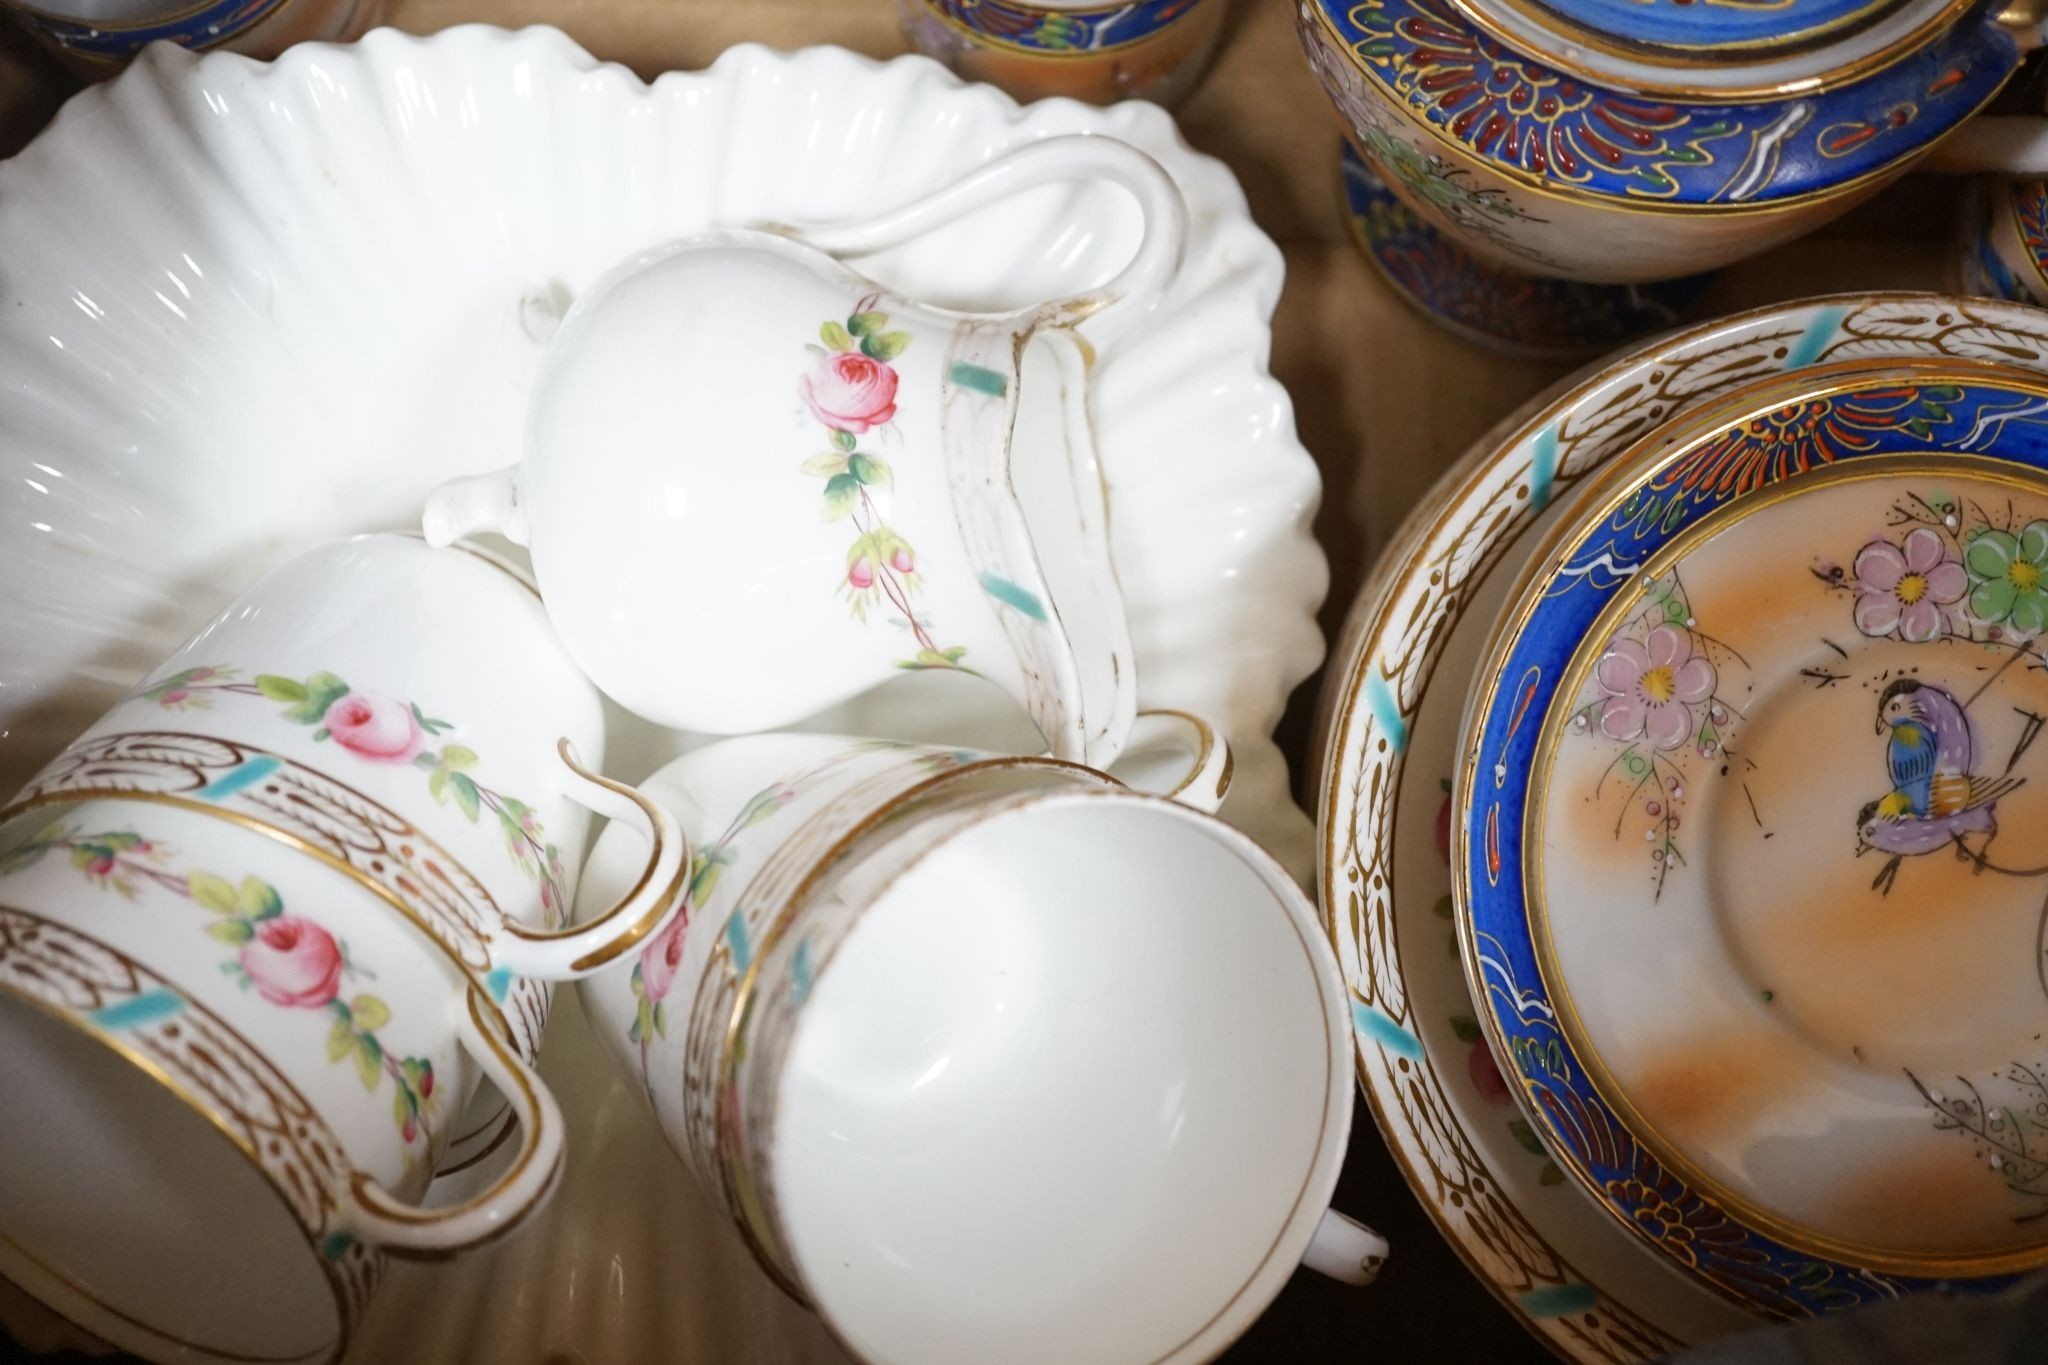 A collection of French provincial plates, various cut glass wine glasses and a Japanese Imari bowl.